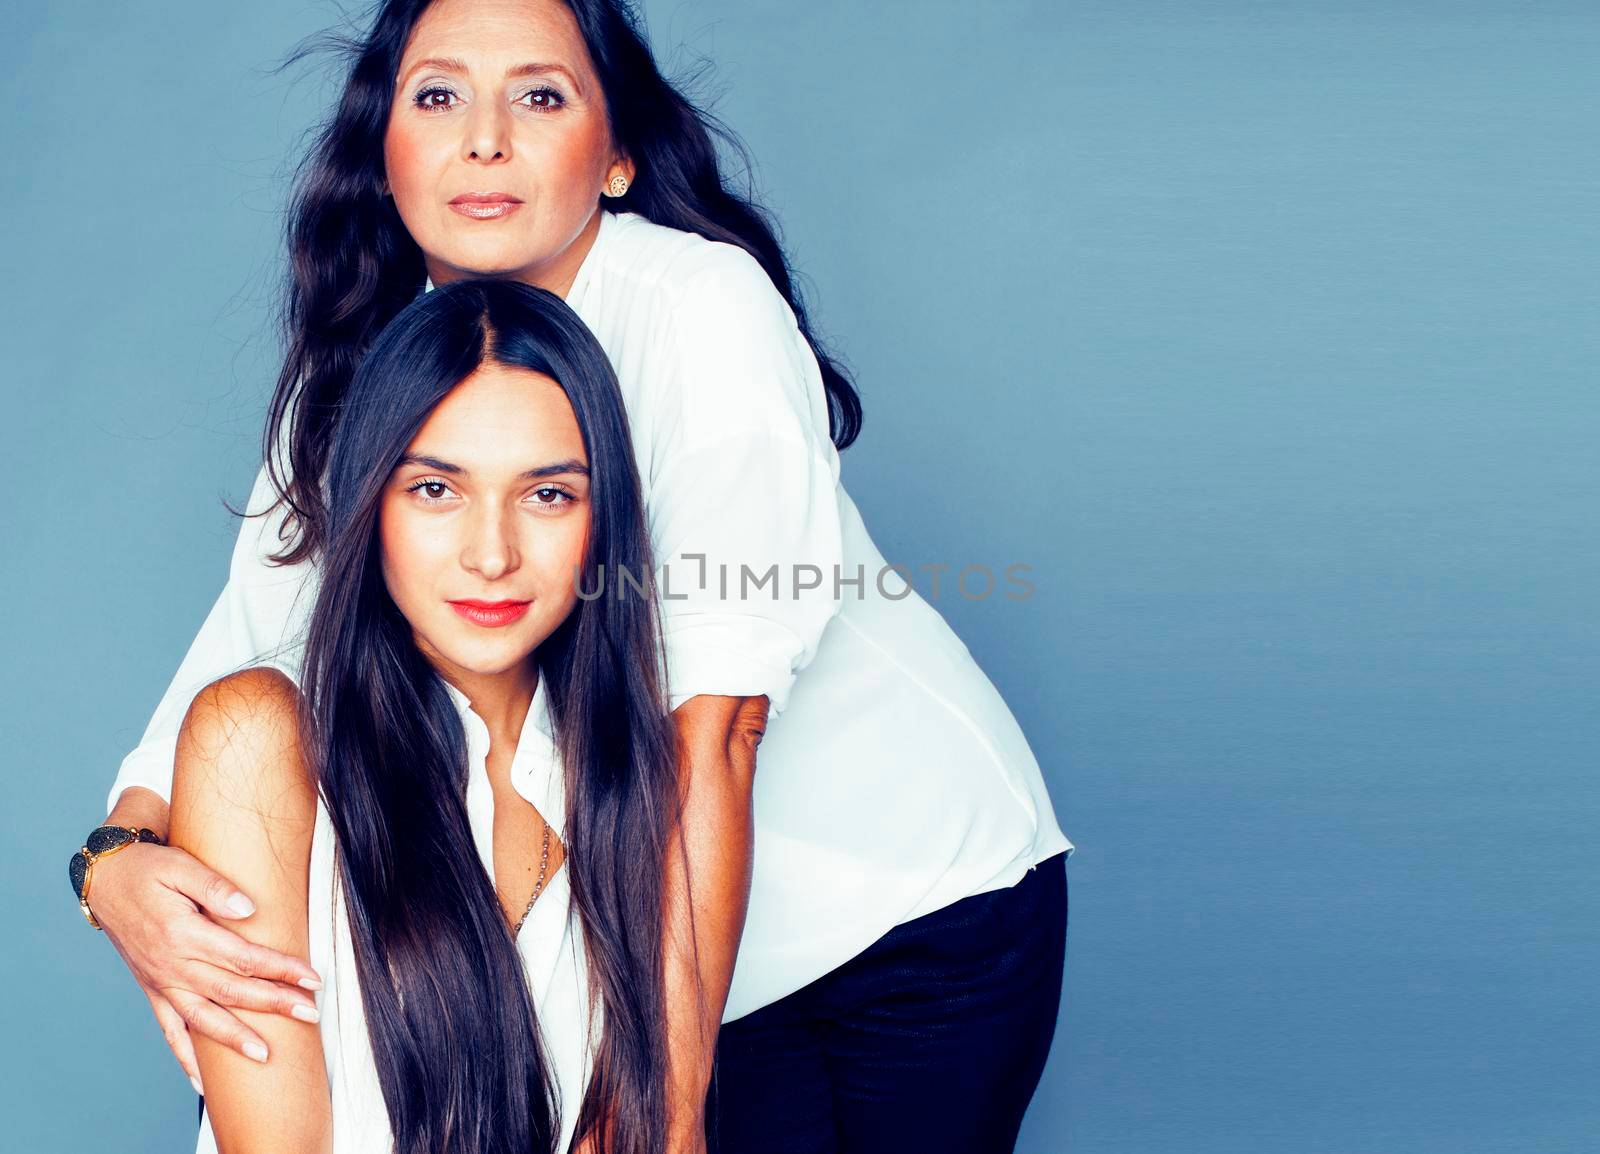 cute pretty teen daughter with mature mother hugging, fashion style brunette, lifestyle people concept close up